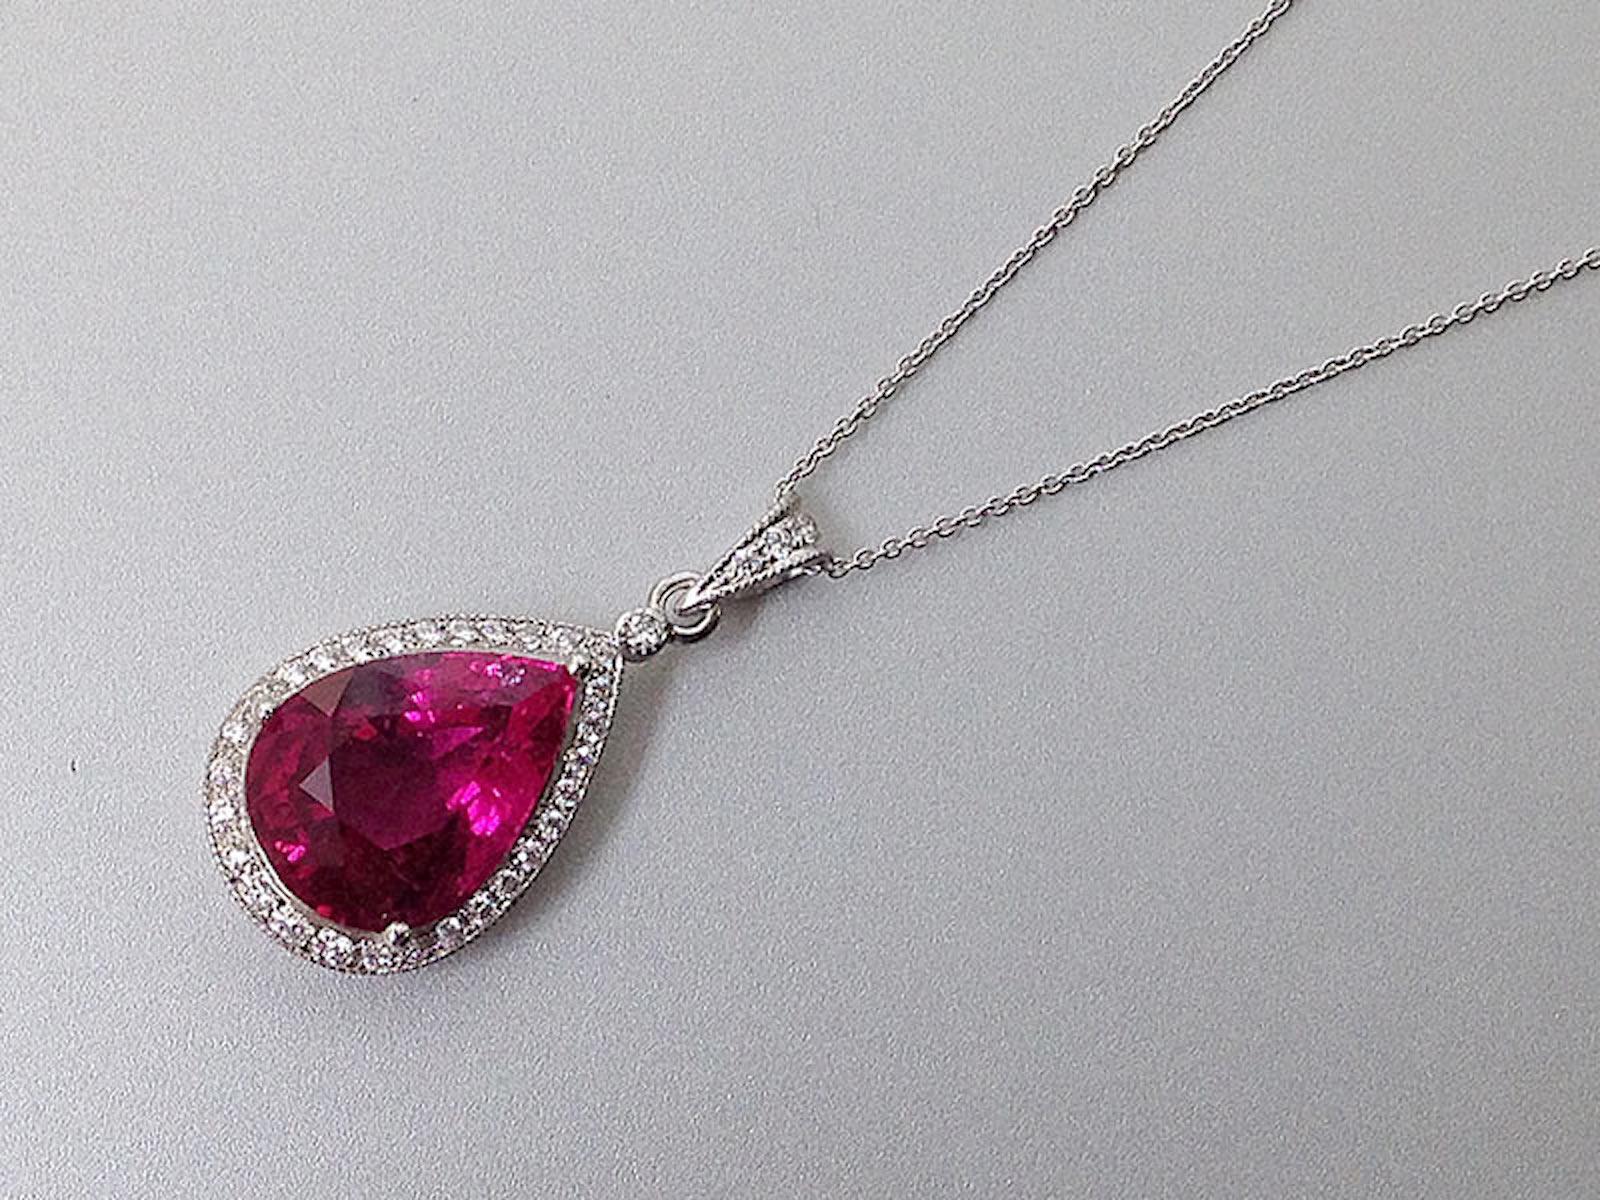 Vibrant bubblegum pink shades embody a sense of playfulness, simplicity, and pure joy. This 5.03 carats Rubellite pendant, elegantly set in 14K White Gold and encircled by perfectly matched diamonds, encapsulates all these lively elements. When you